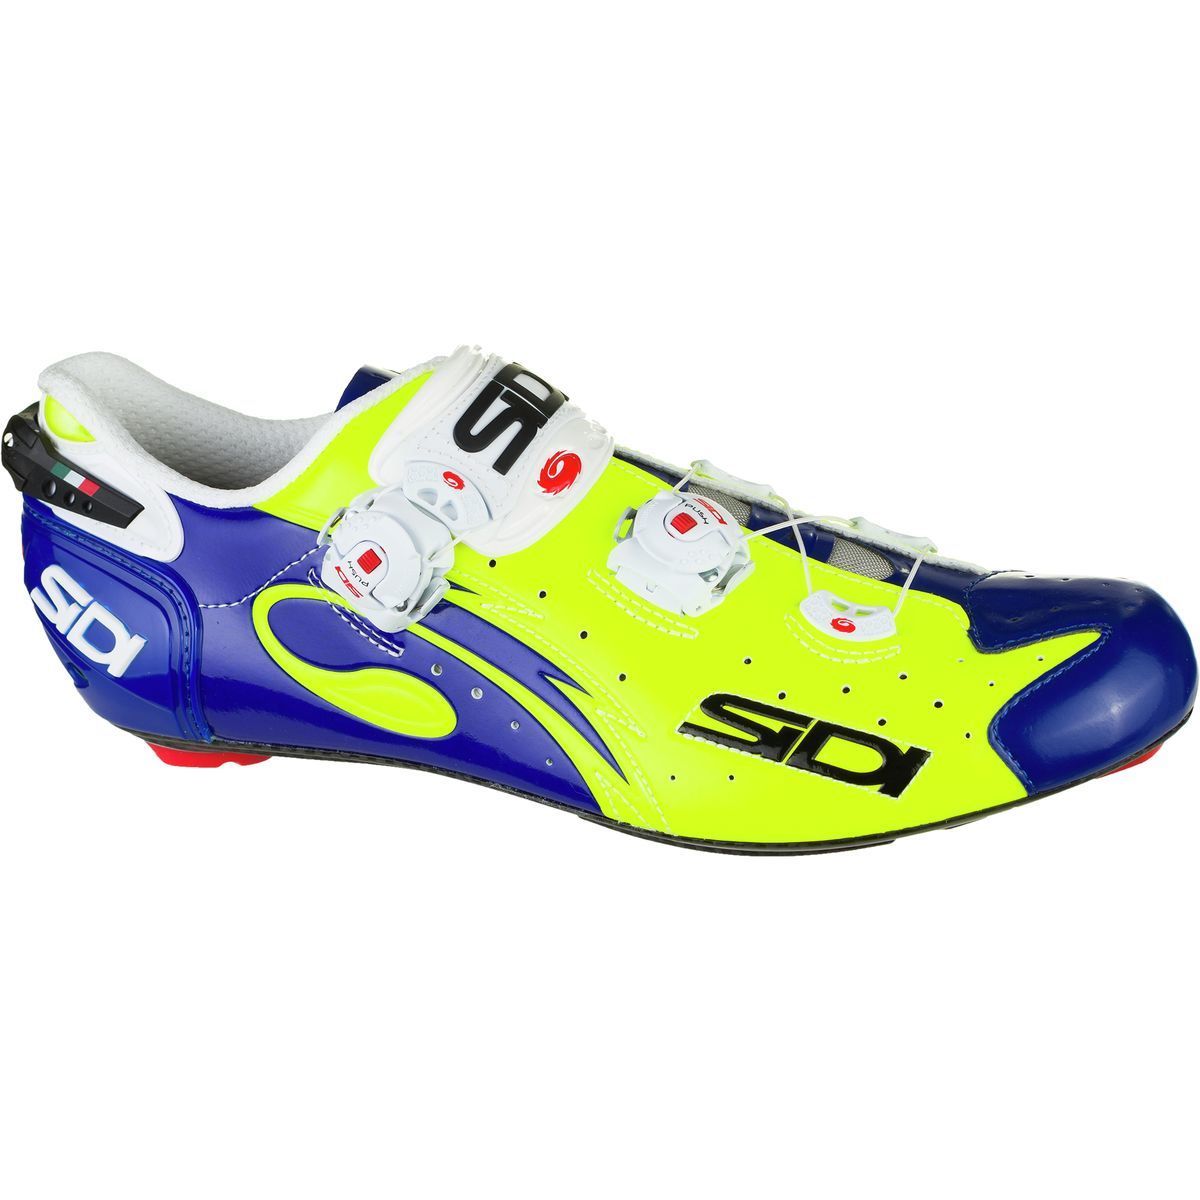 New SIDI WIRE Carbon Road Bike Cycling Shoes Yellow Fluo Blue US Warehouse 